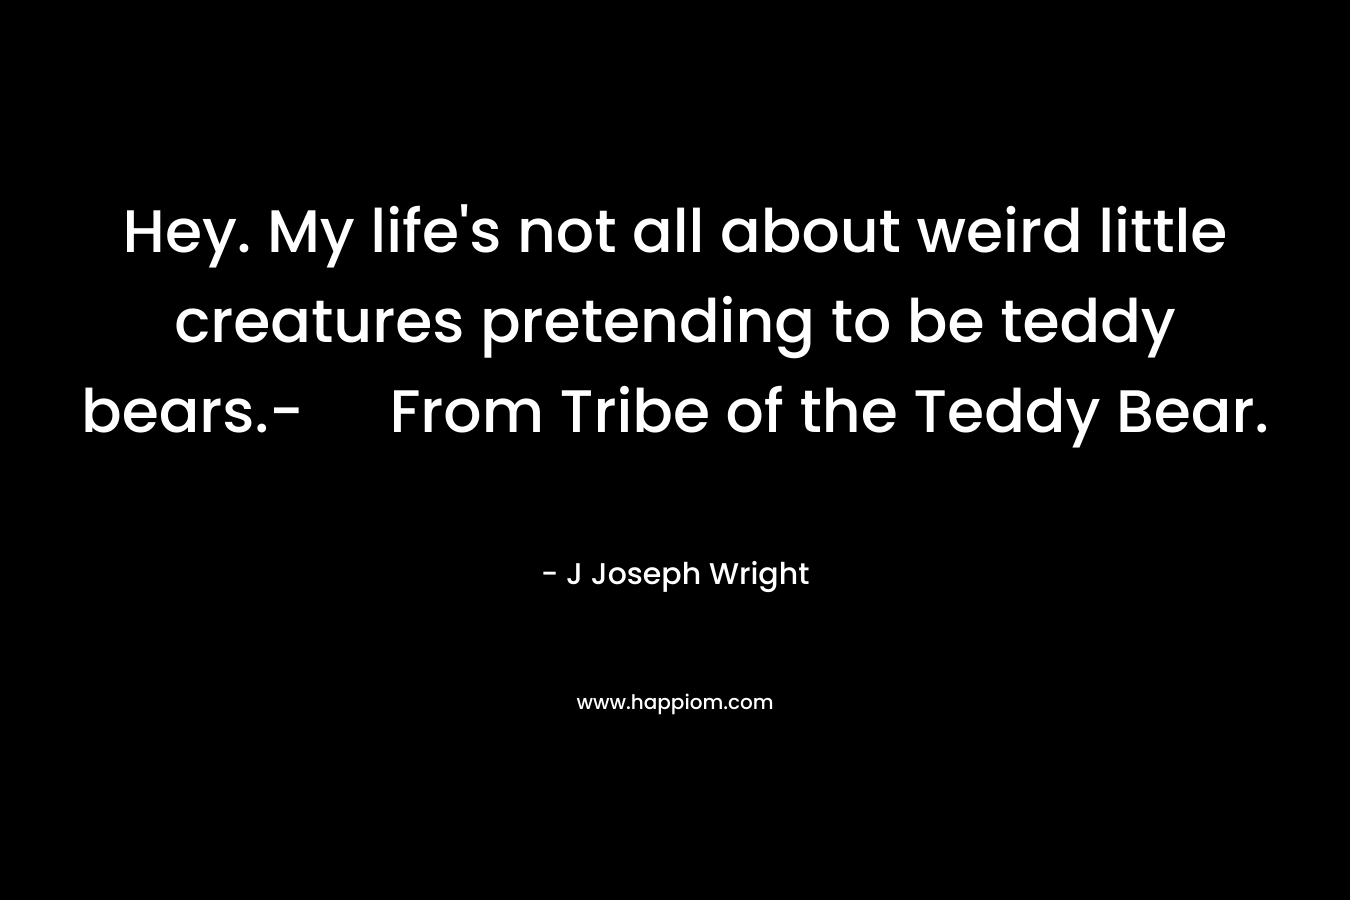 Hey. My life’s not all about weird little creatures pretending to be teddy bears.- From Tribe of the Teddy Bear. – J Joseph Wright